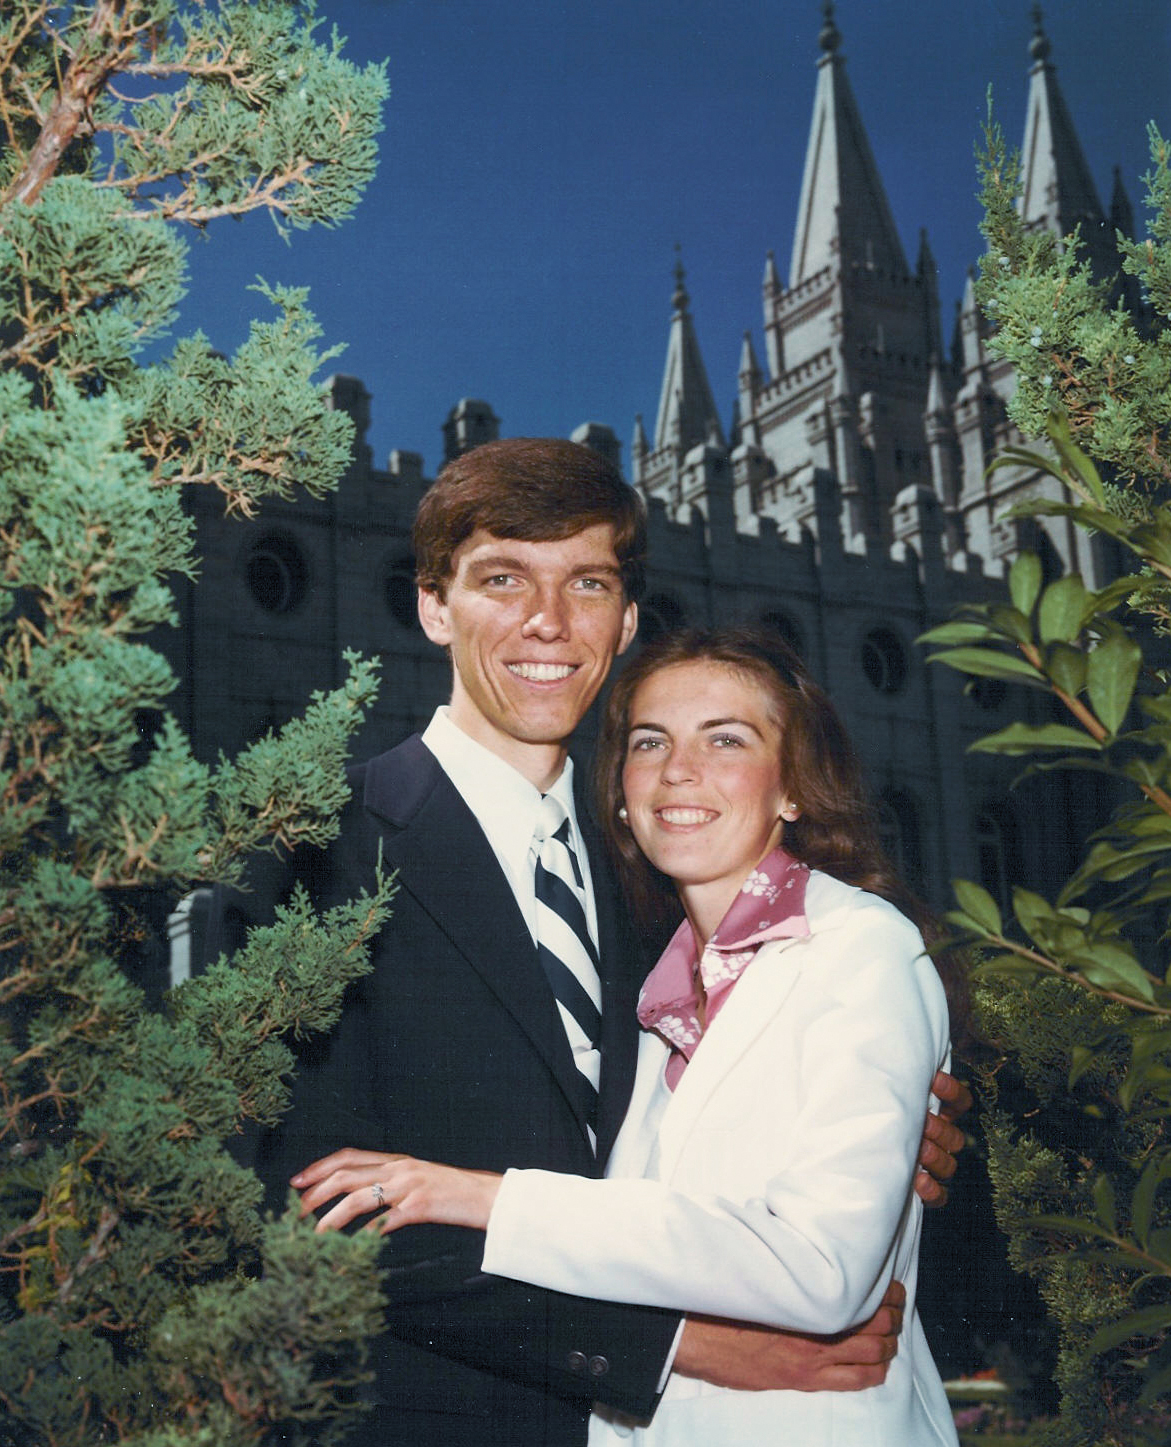 Young Christensen posing with his wife in front of the Salt Lake Temple